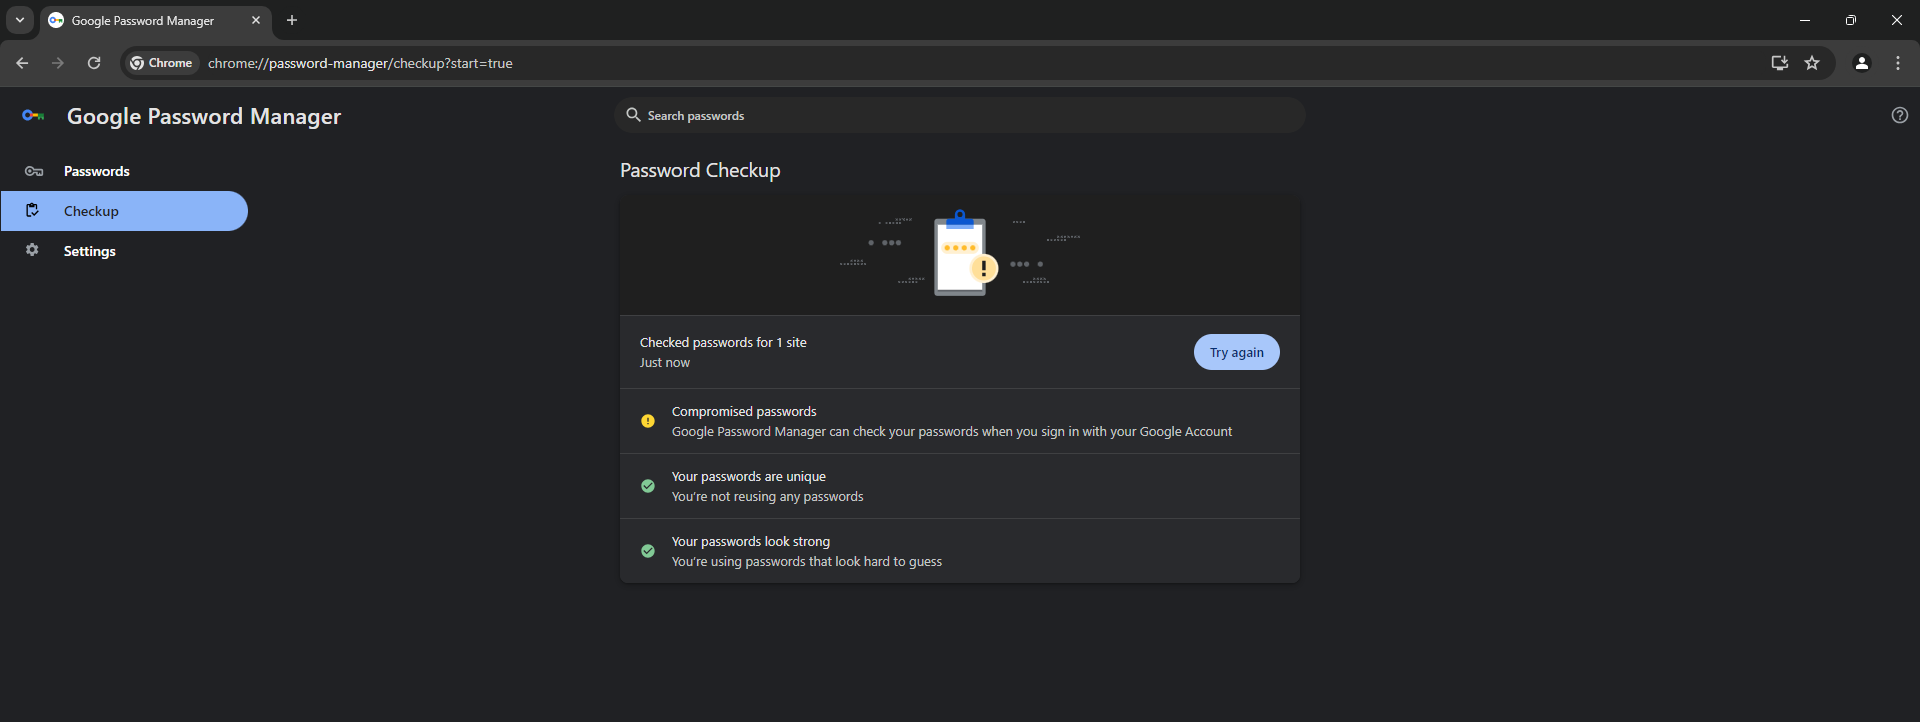 Google Password Manager in Chrome